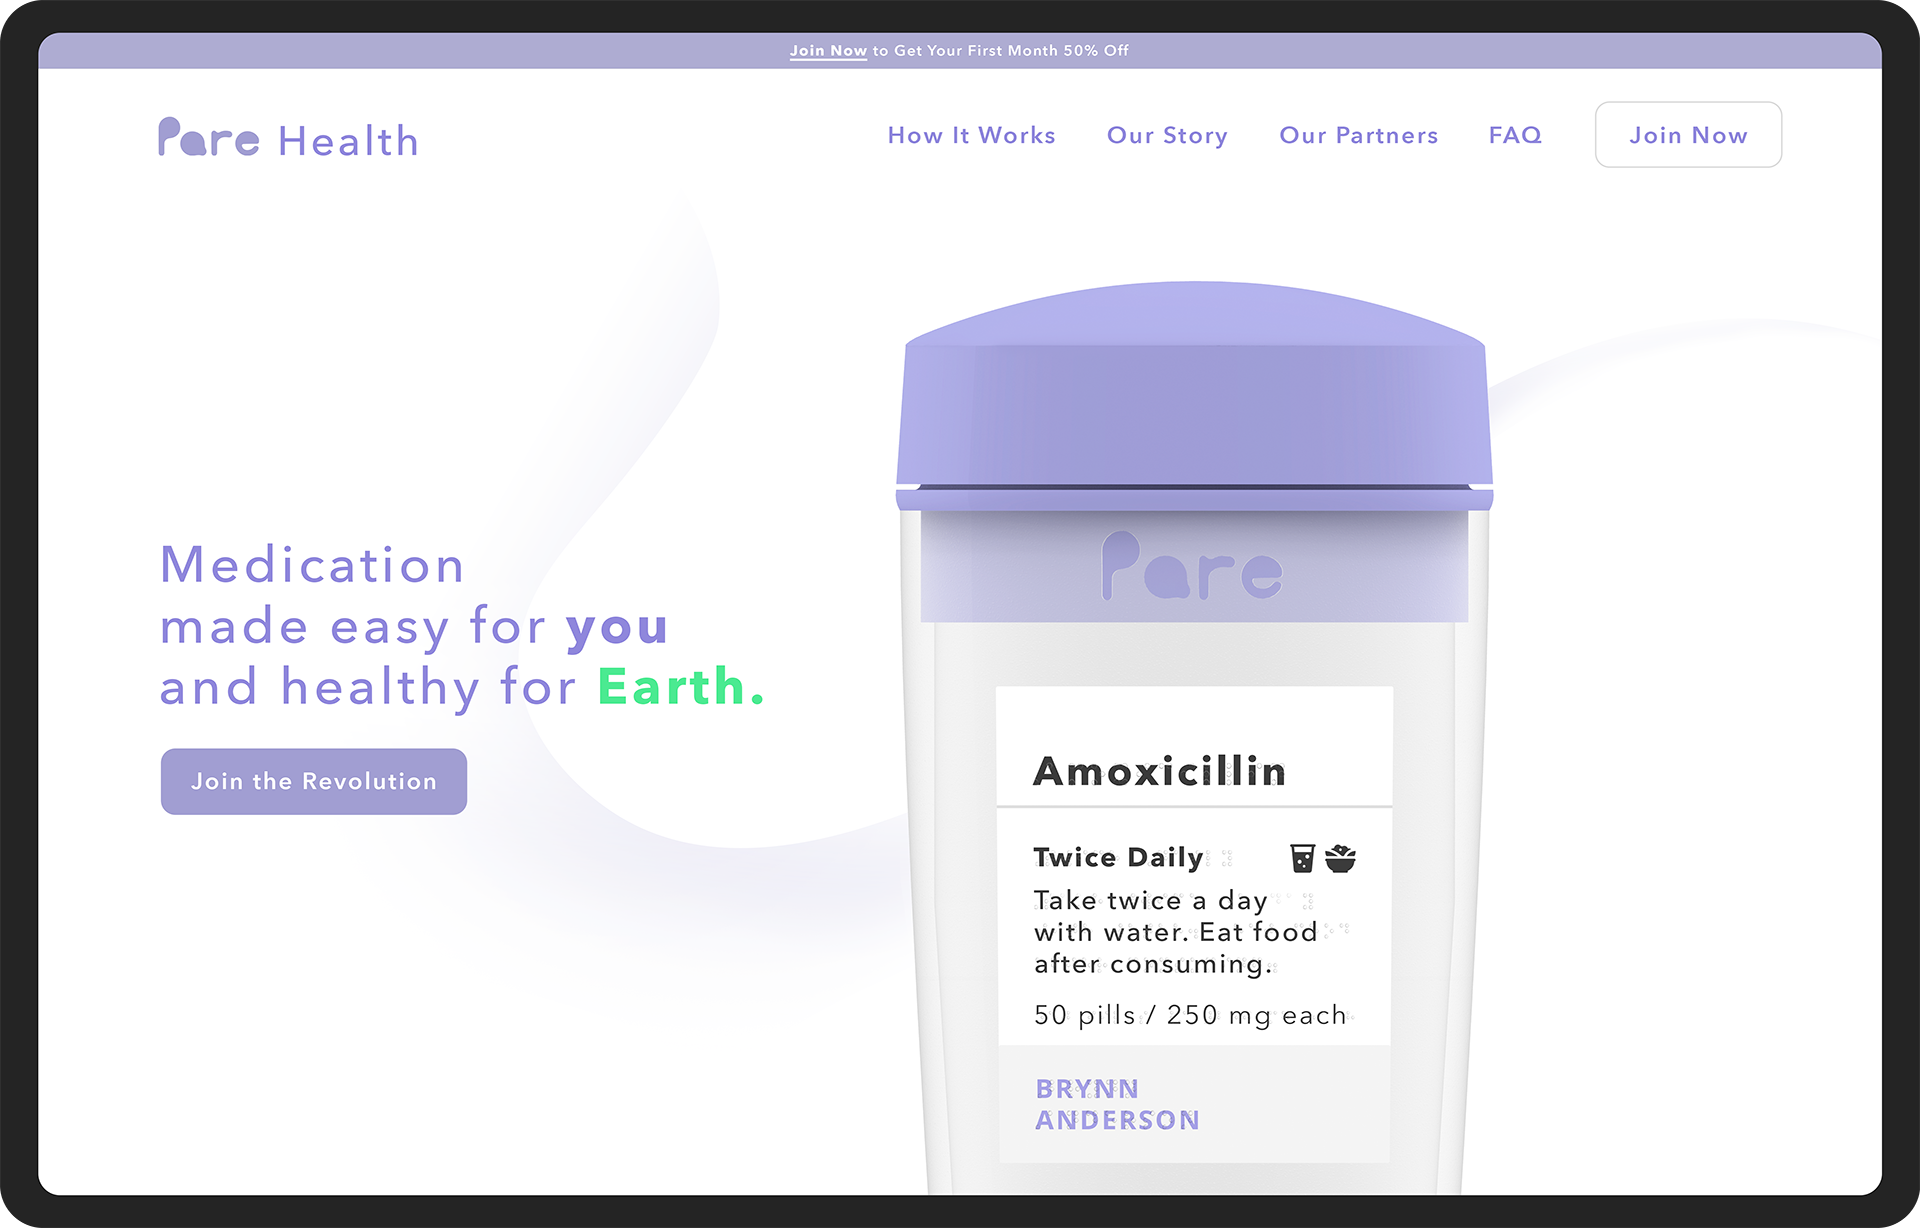 PareHealth project link.